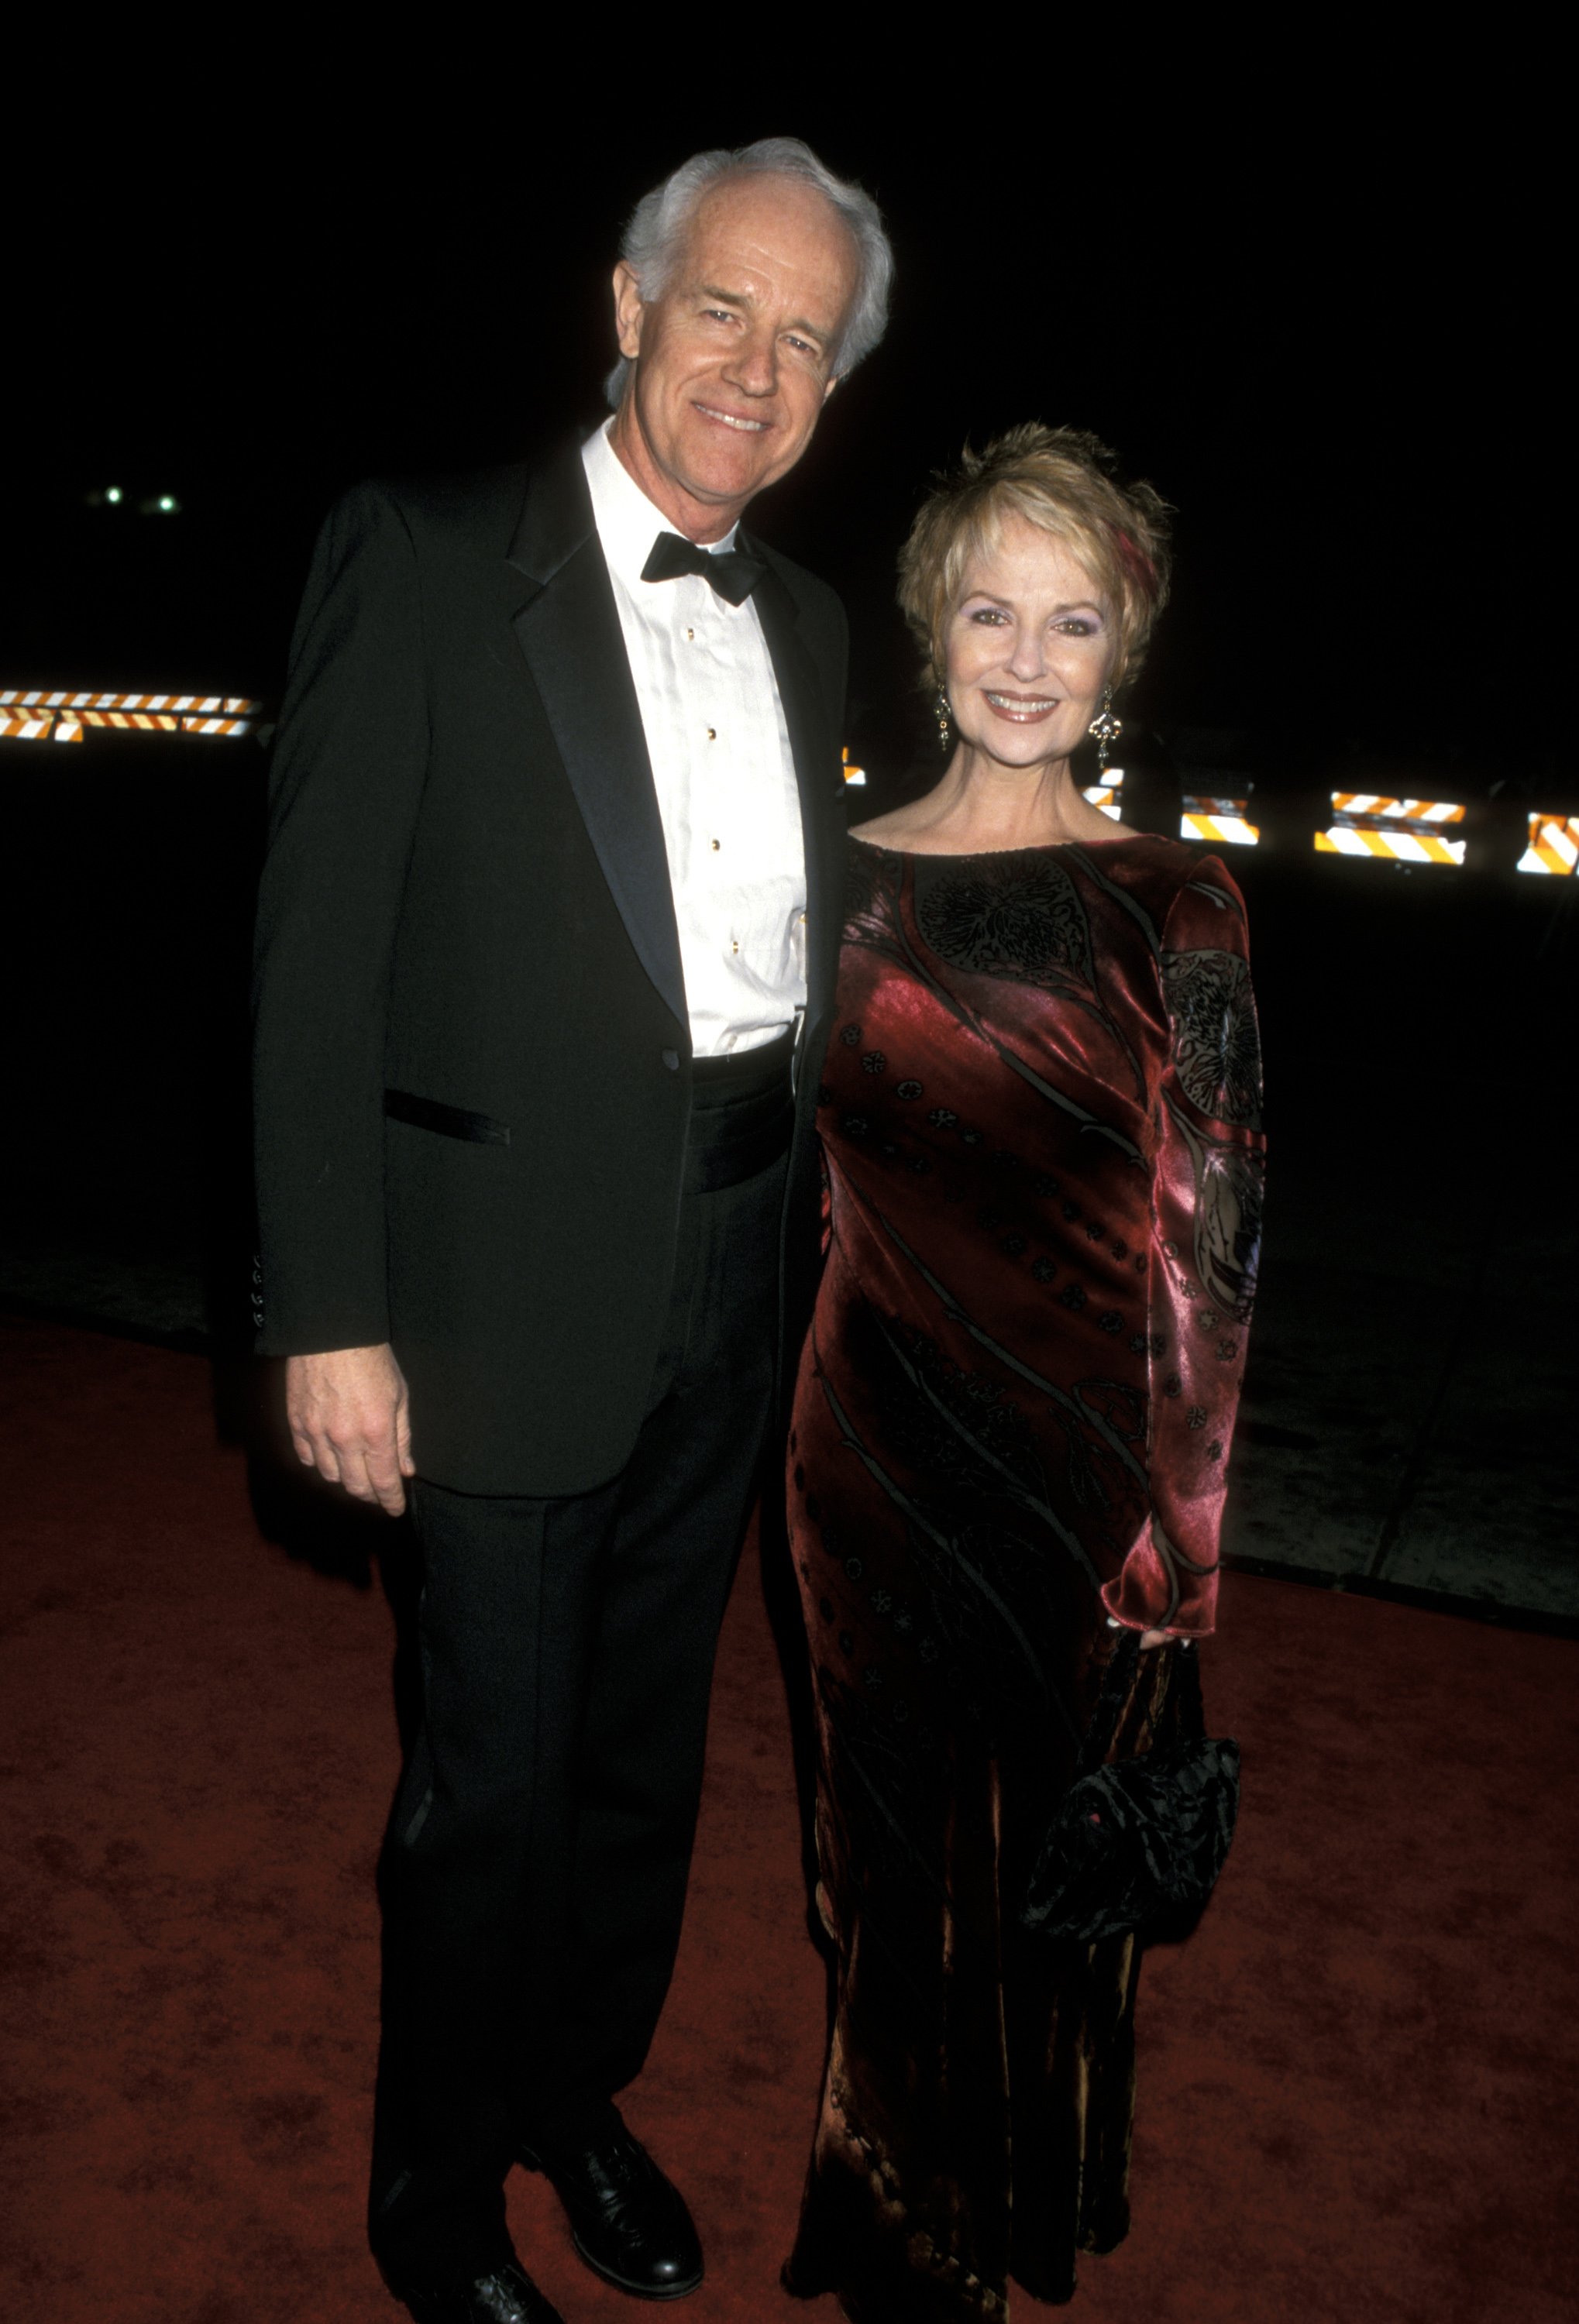 Shelley Fabares and Mike Farrell at the 26th Annual People's Choice Awards on January 9, 2000 | Source: Getty Images